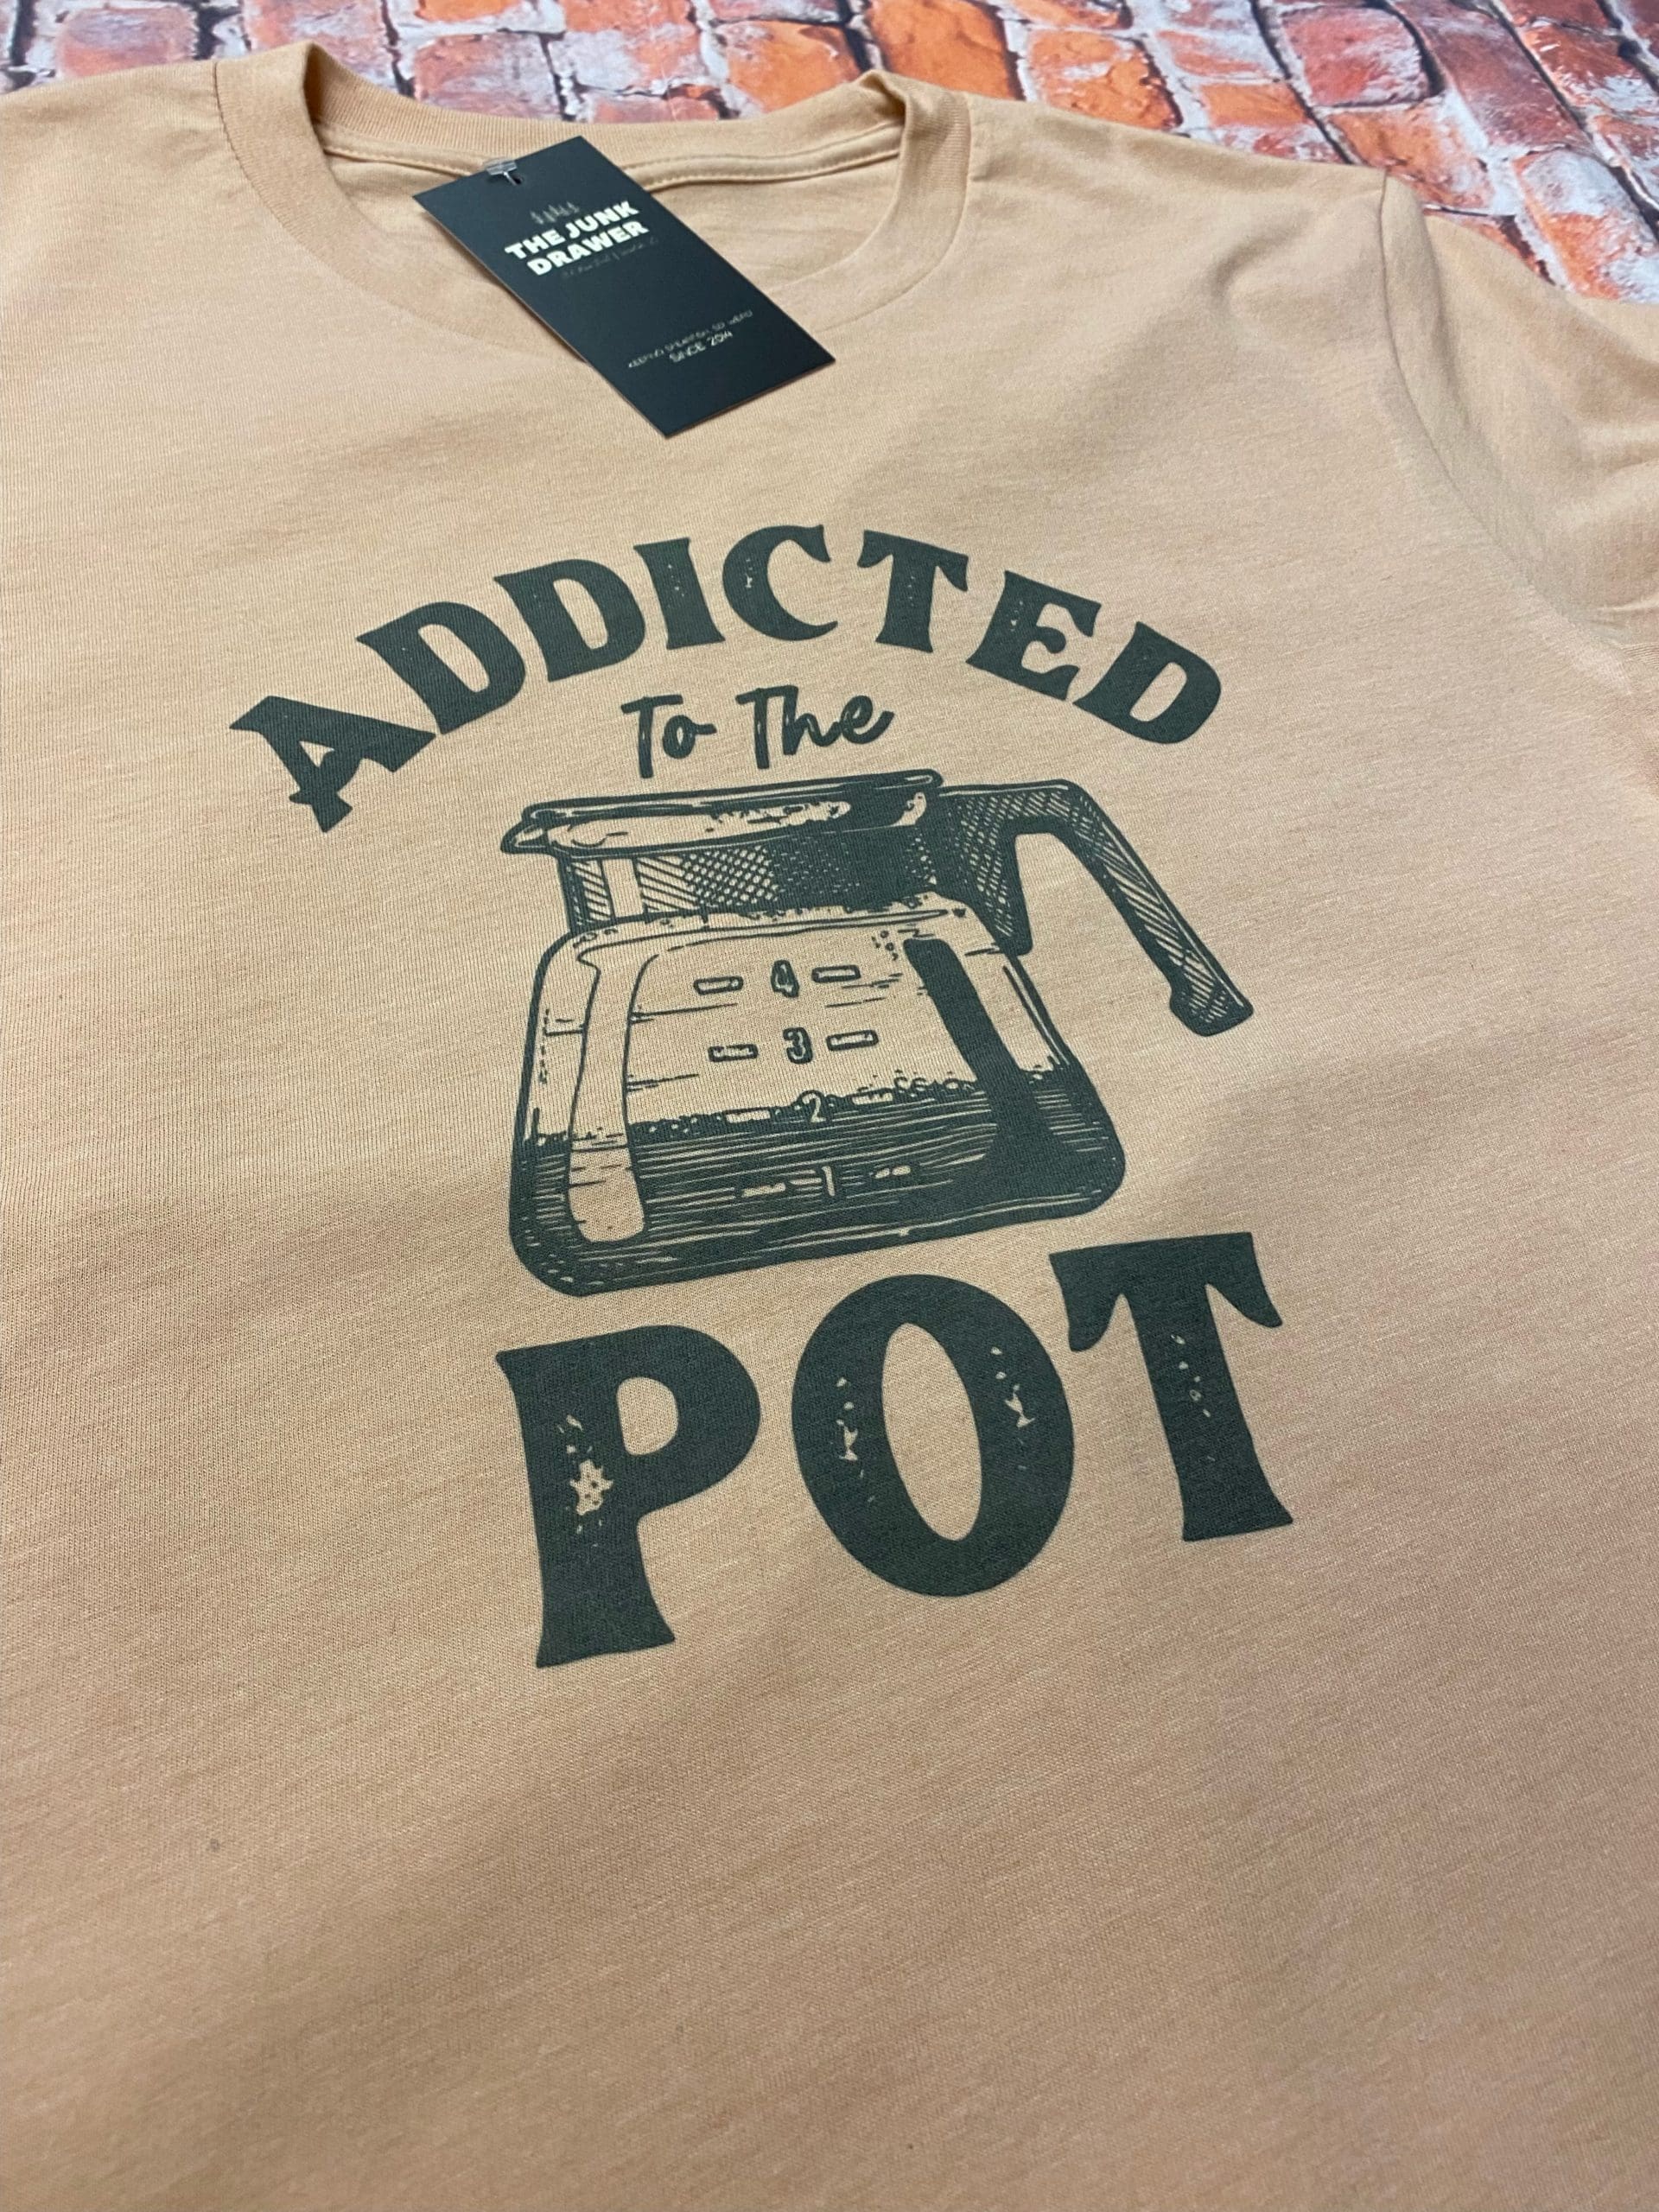 Addicted to Pots